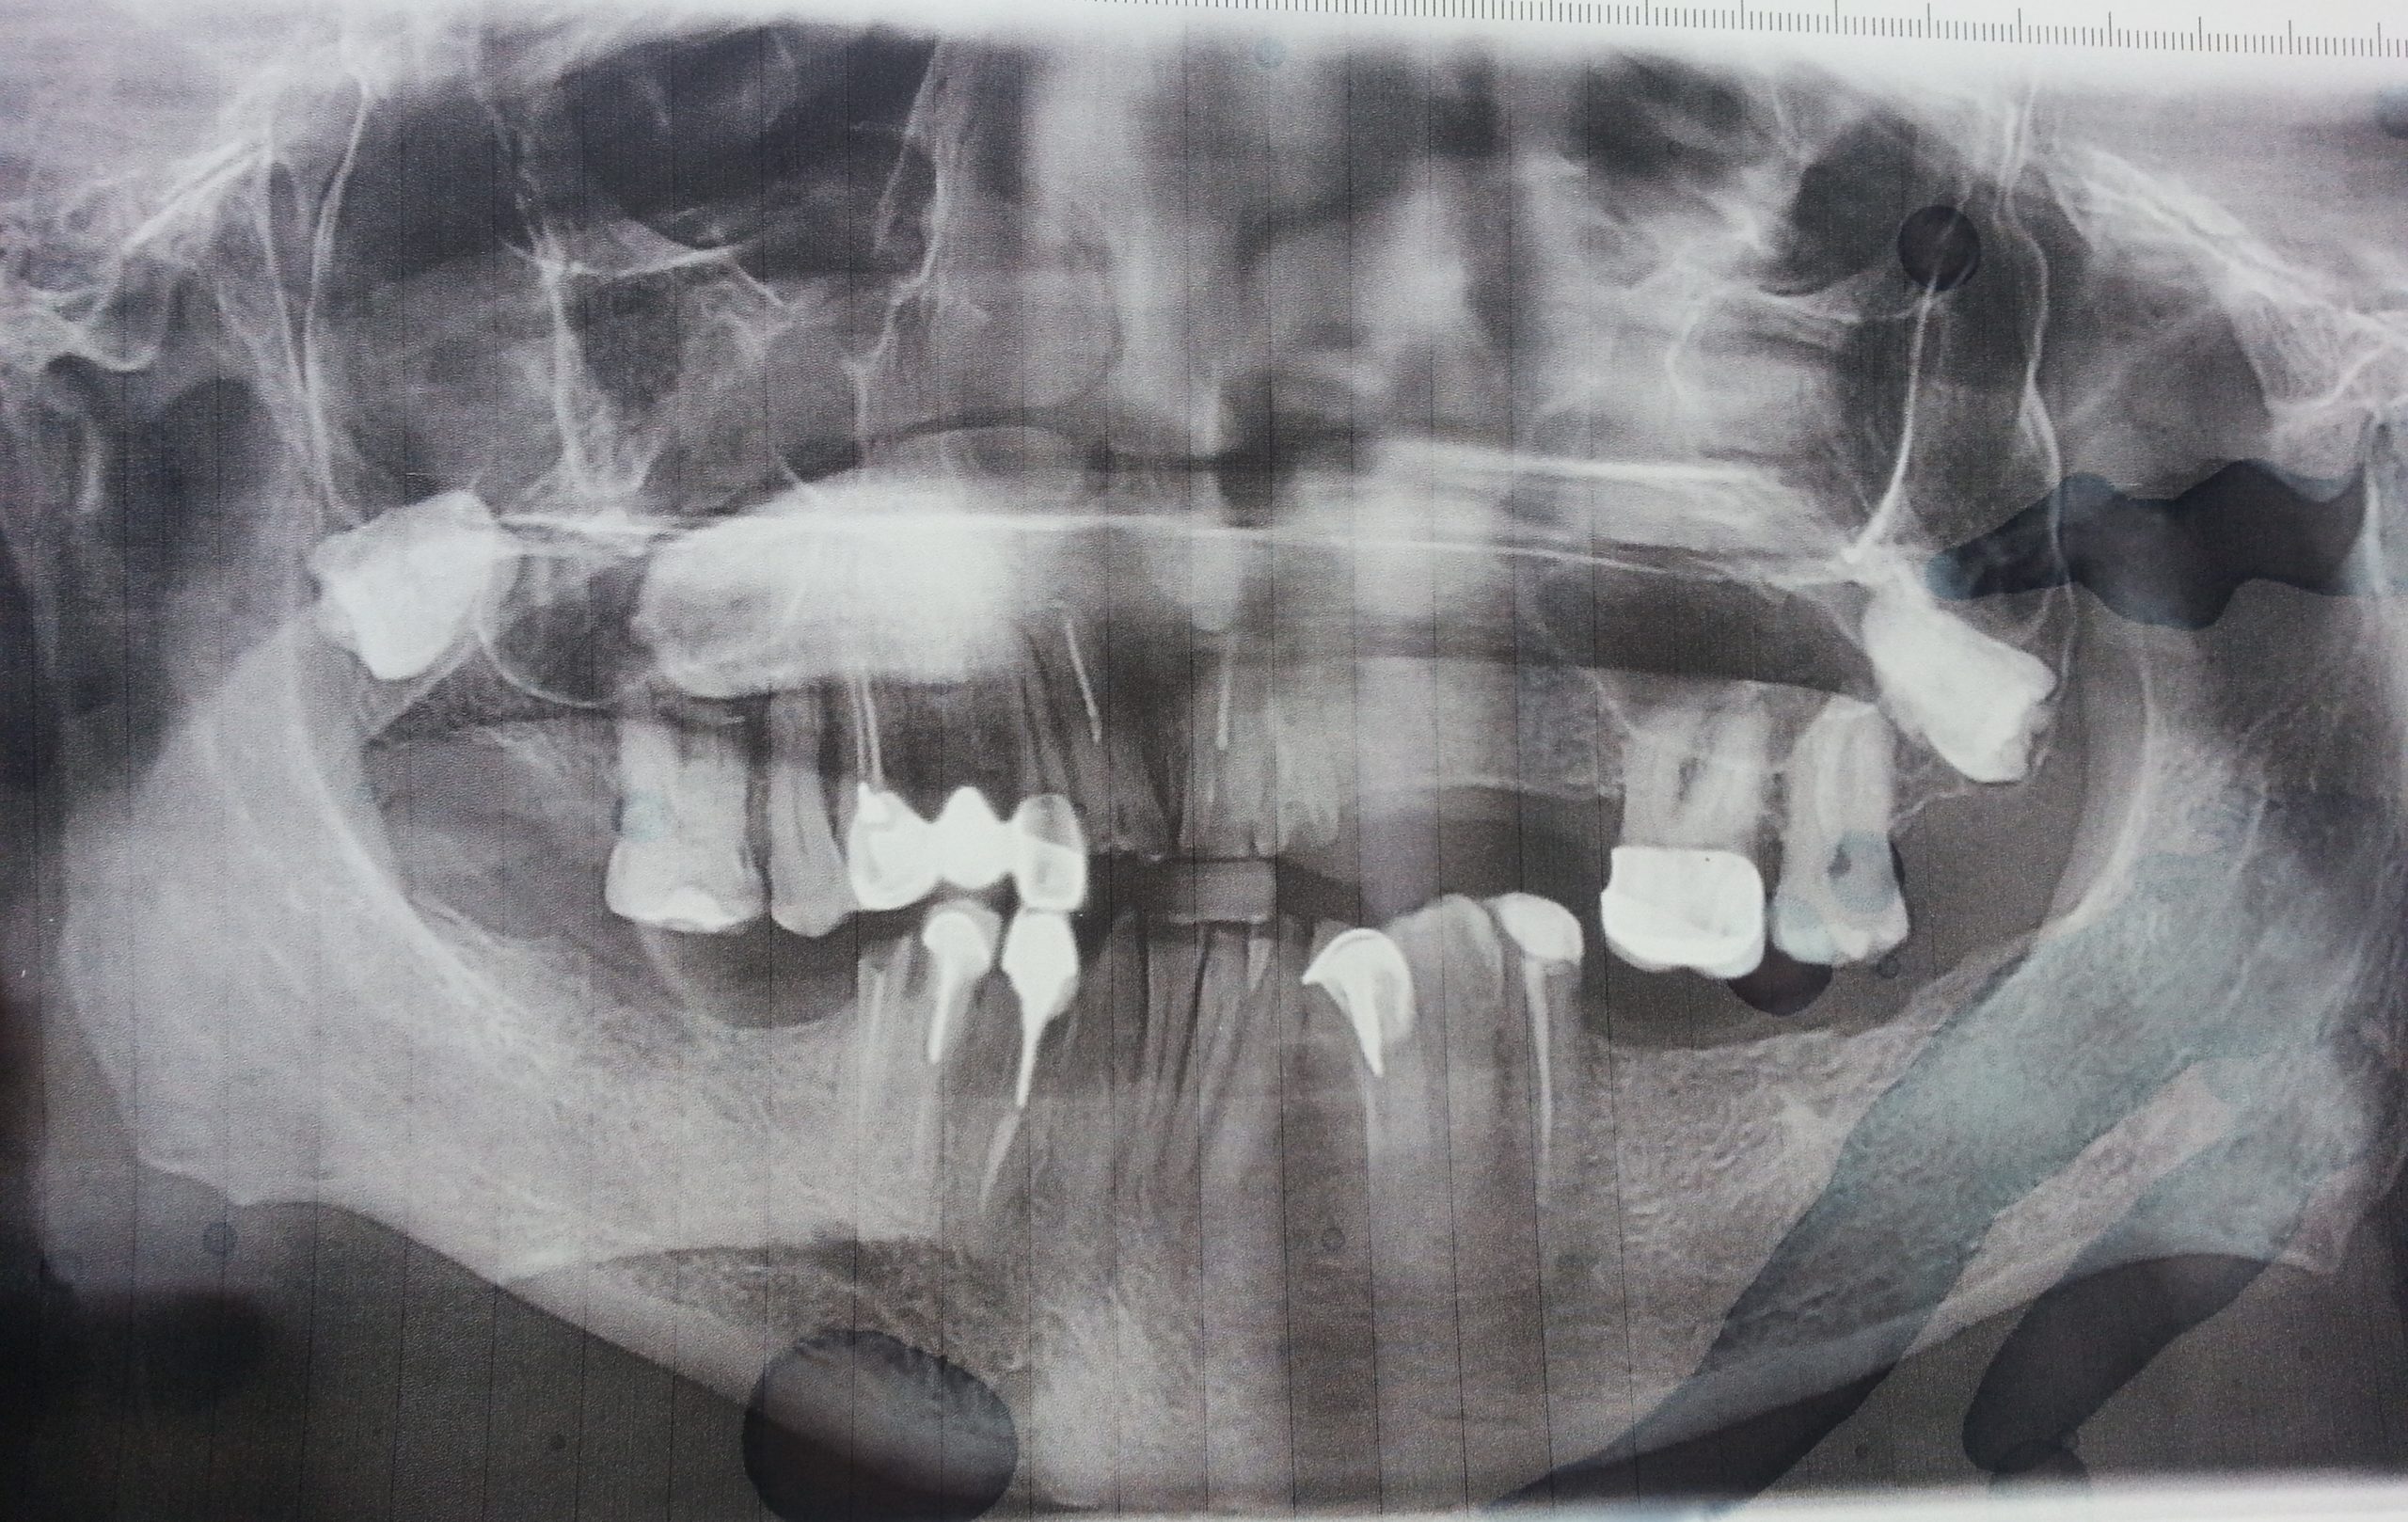 https://dentalexcellence.co.in/wp-content/uploads/2023/02/Pt-2-Pre-Implant-Xray-scaled.jpg